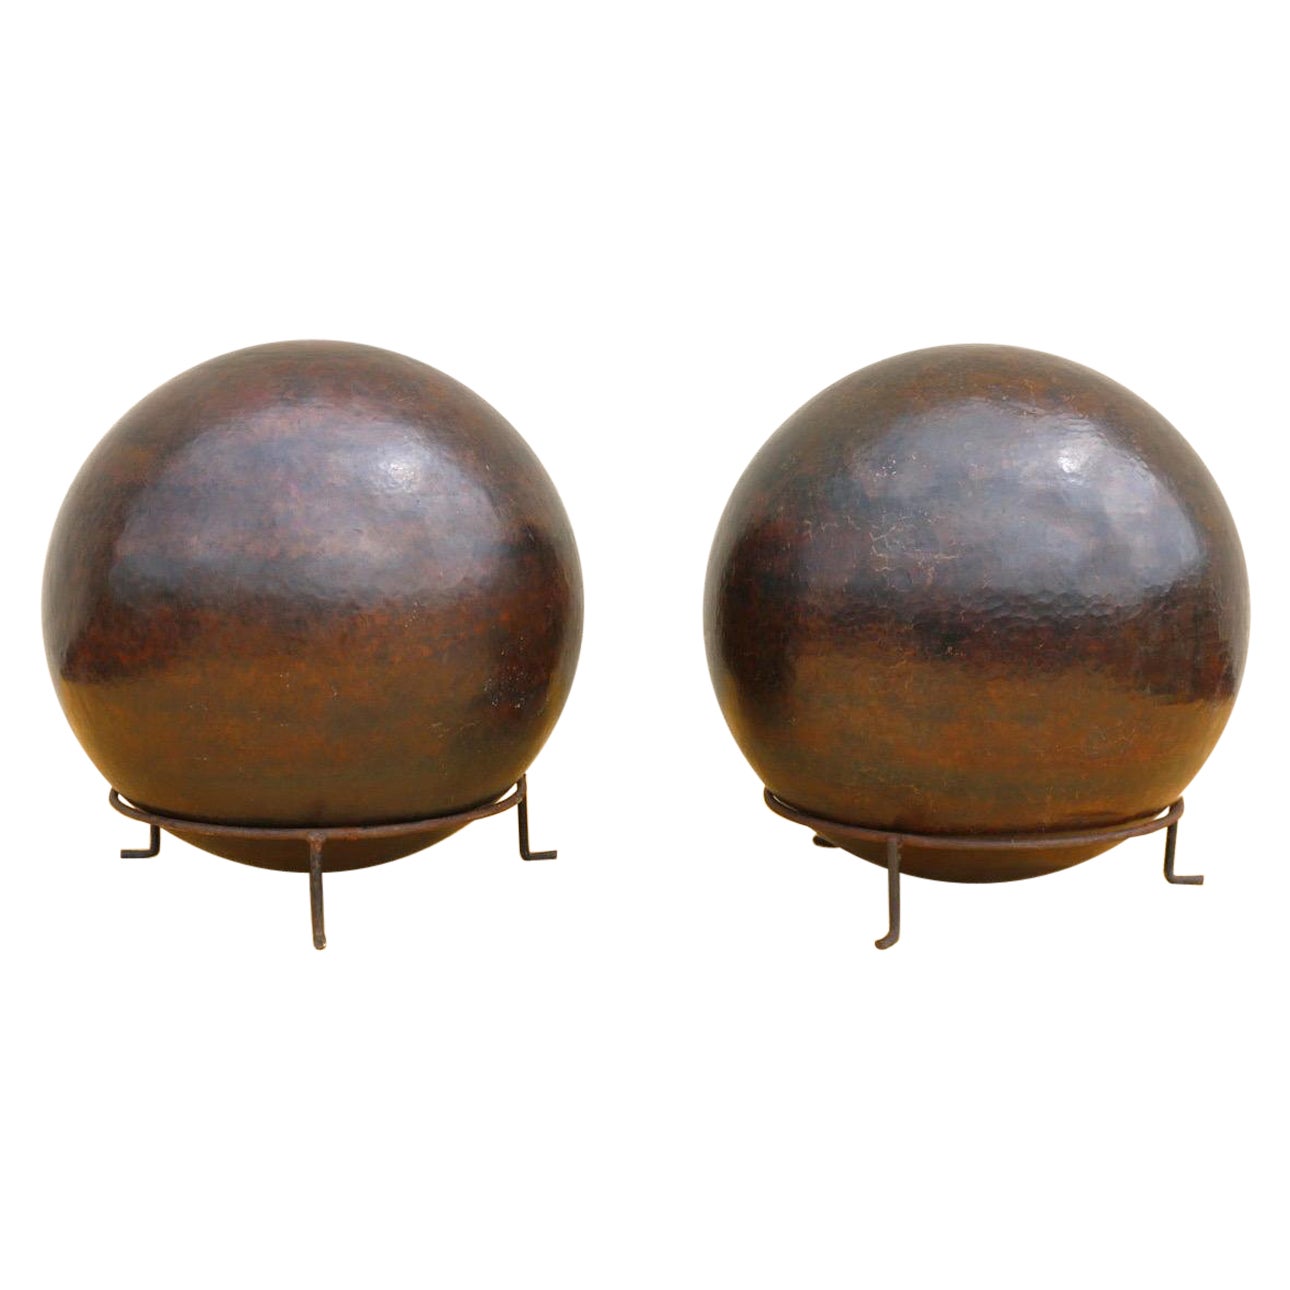 1980s Vintage Pair of Copper Spheres Sculptures by Robert Kuo For Sale